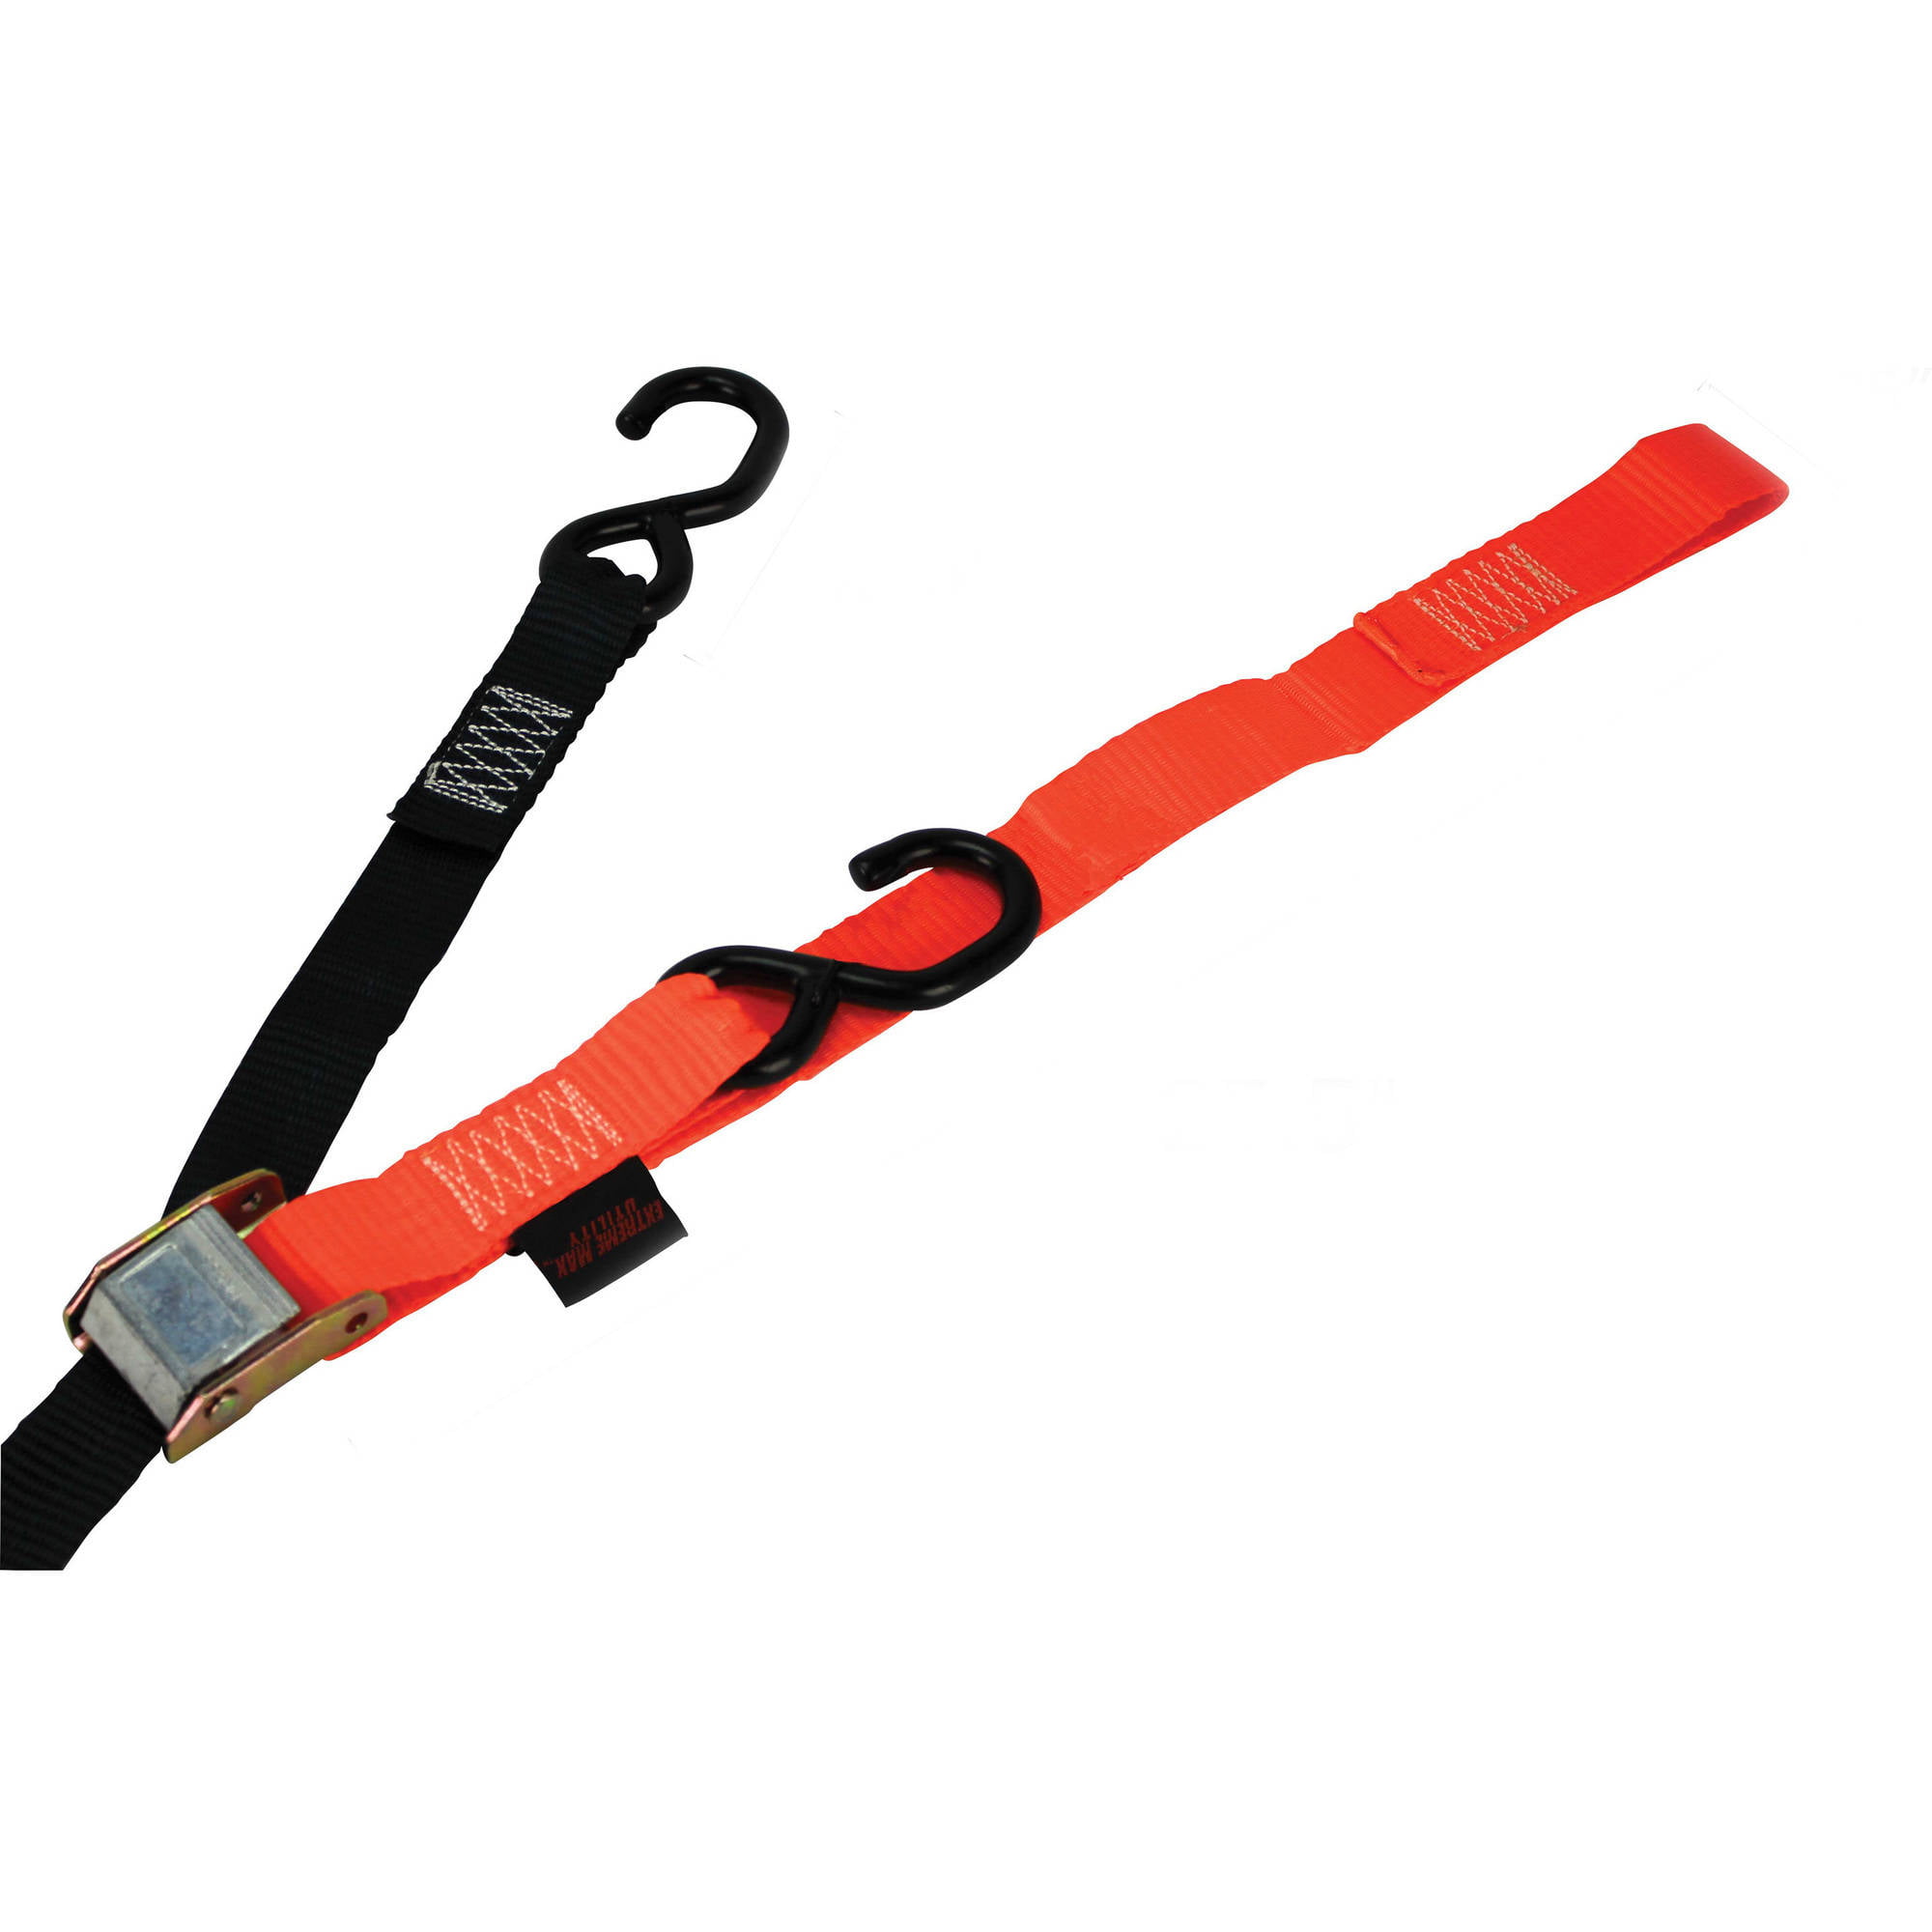 SLASHER EXTREME ATV MOTORCYCLE RACHET TYPE TIE DOWN 1.5" X 7' RED WITH SOFT TIES